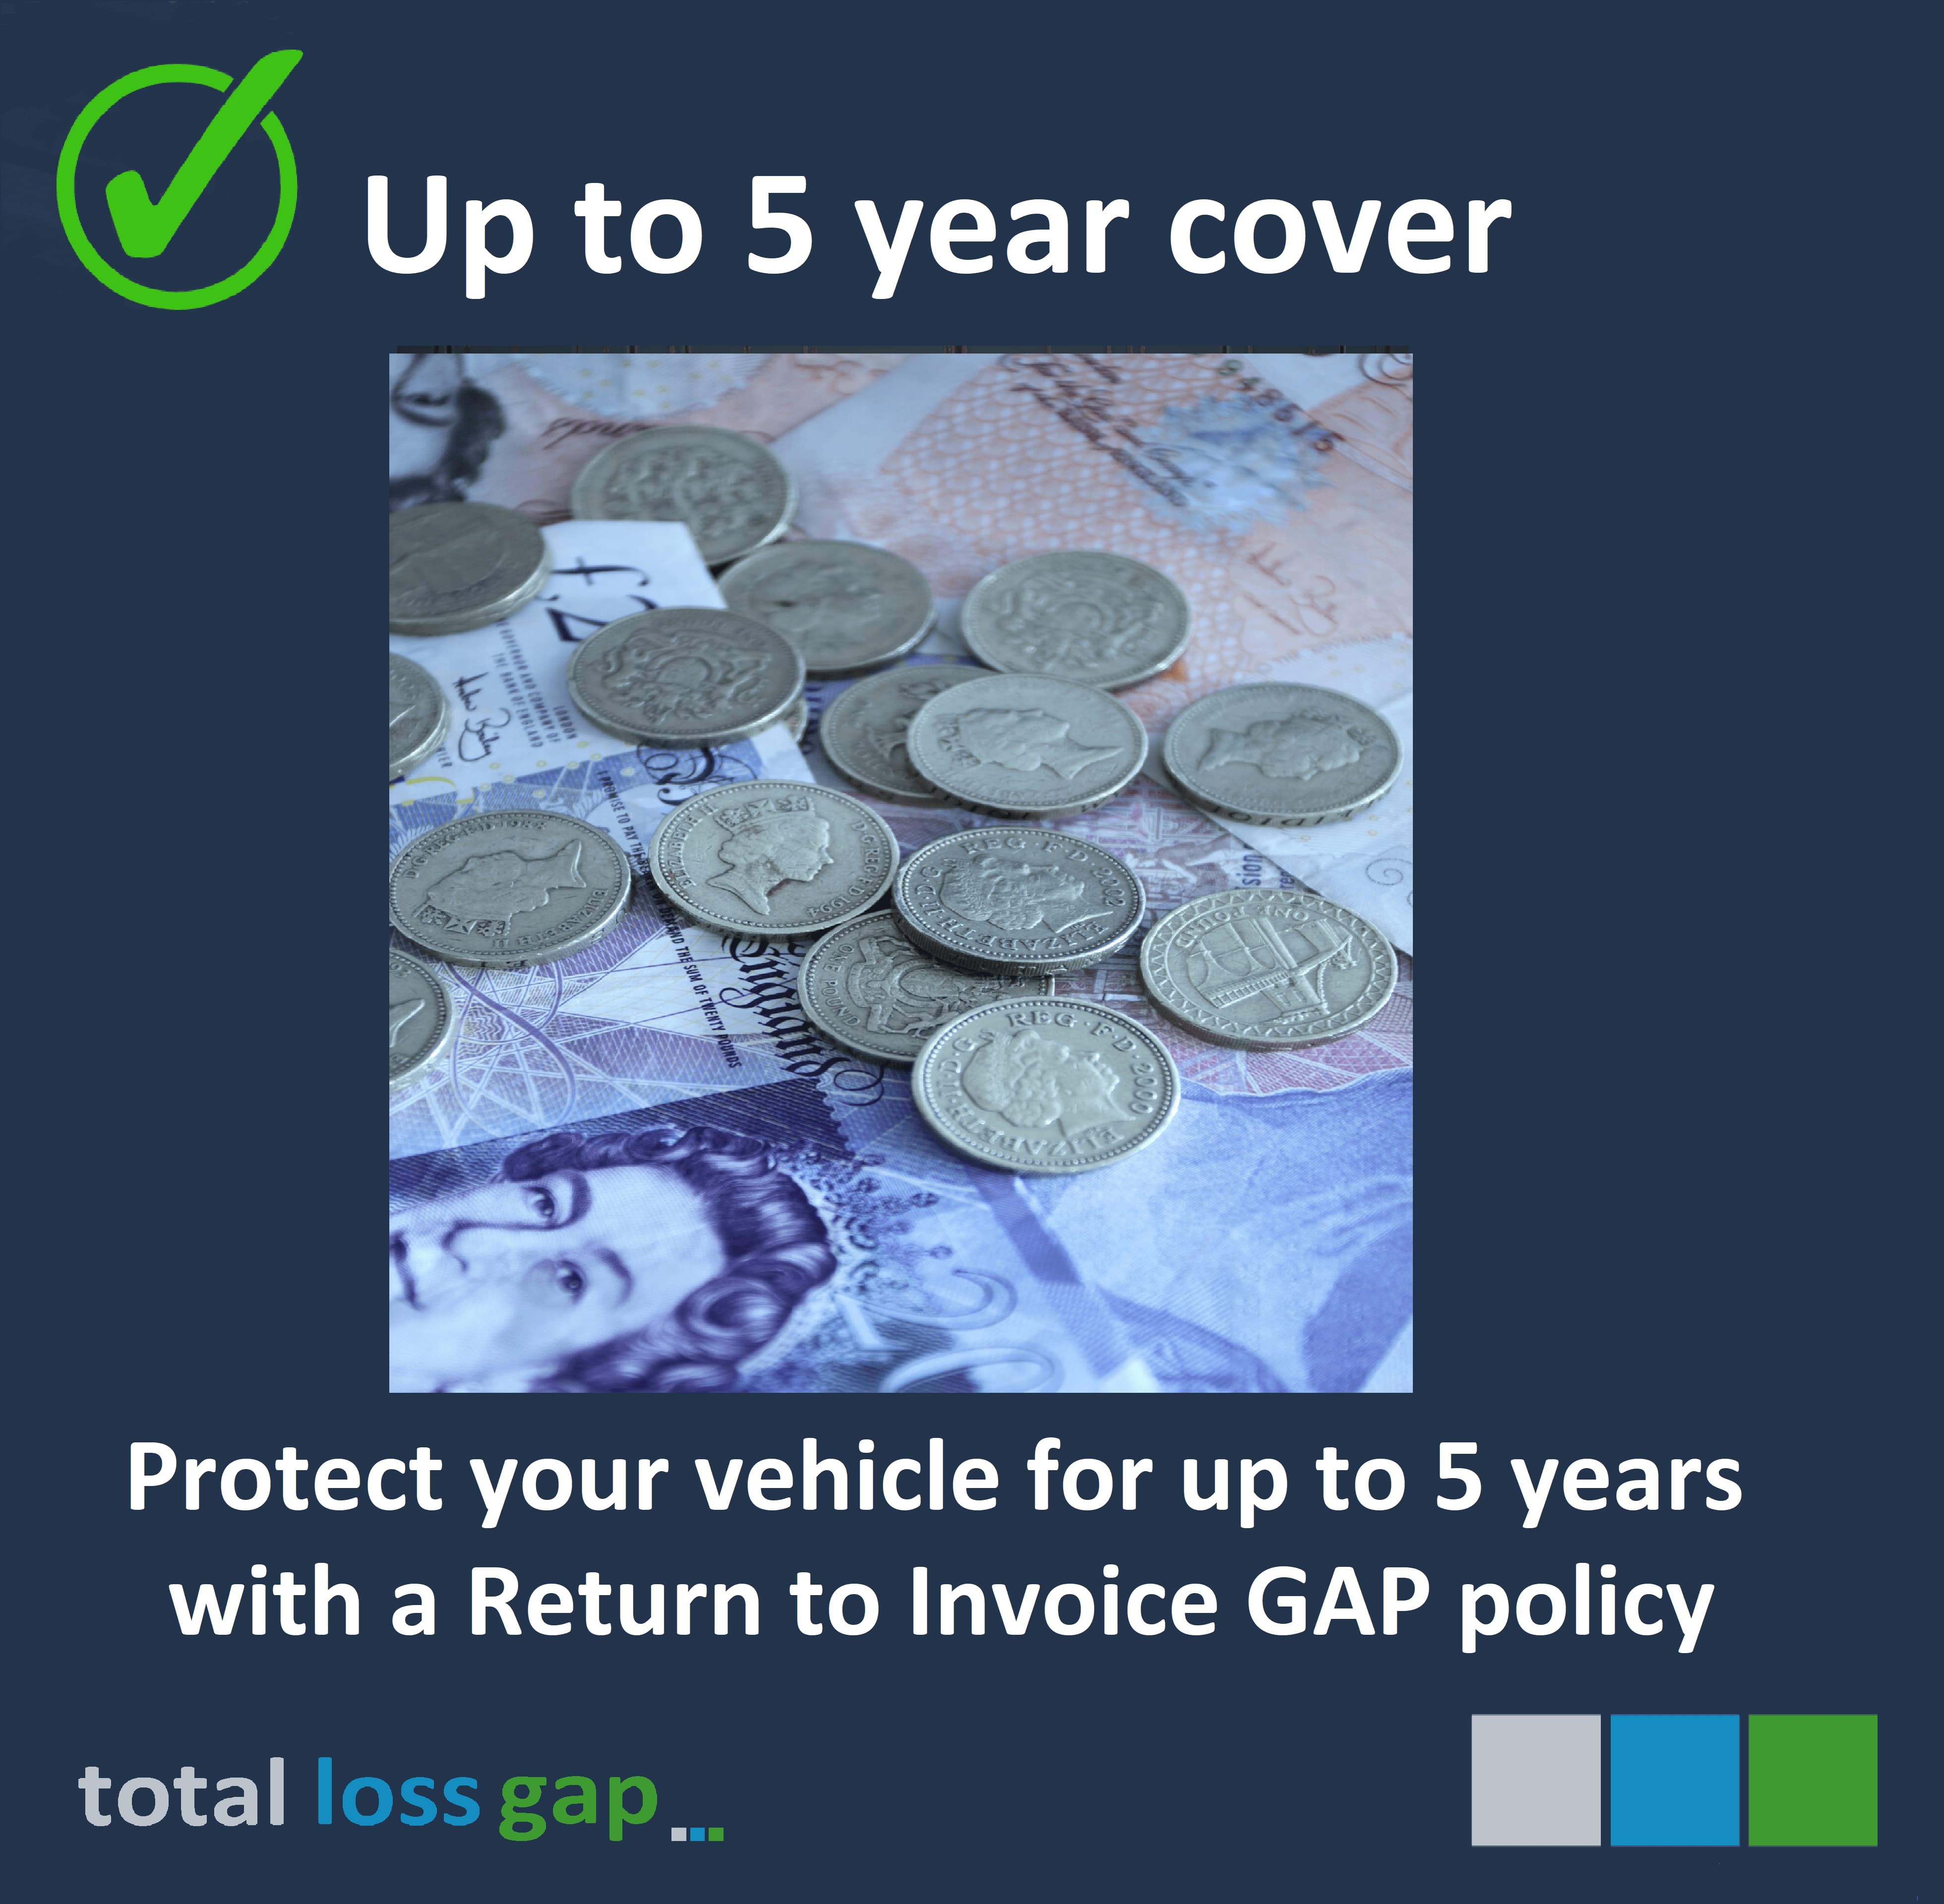 You Can Buy up to 5 years return to invoice gap insurance